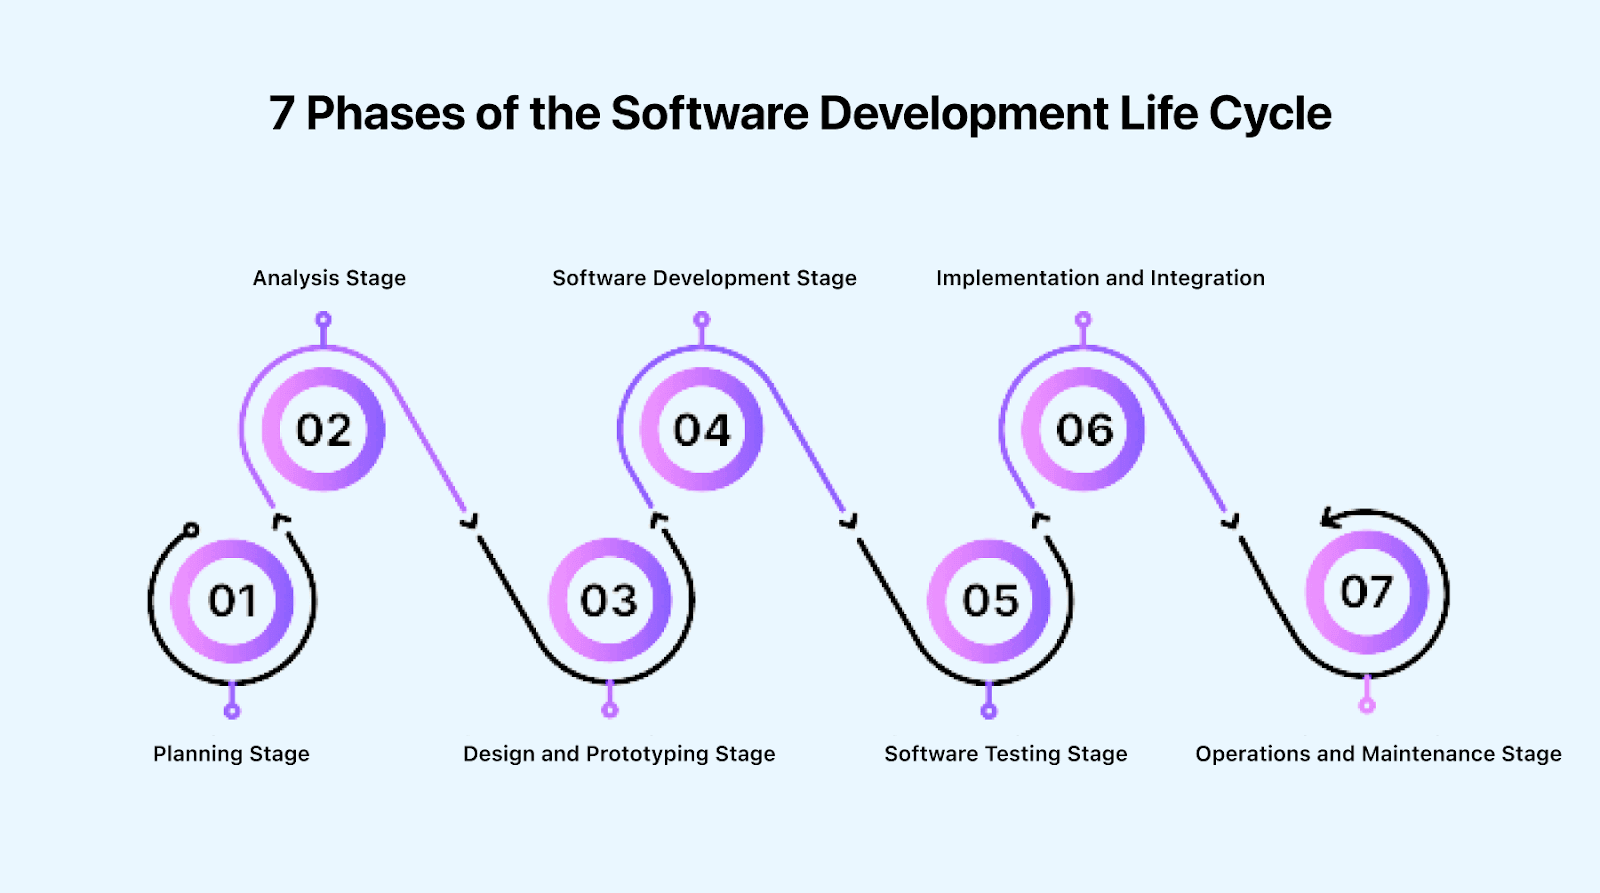 7 phases of the software development life cycle